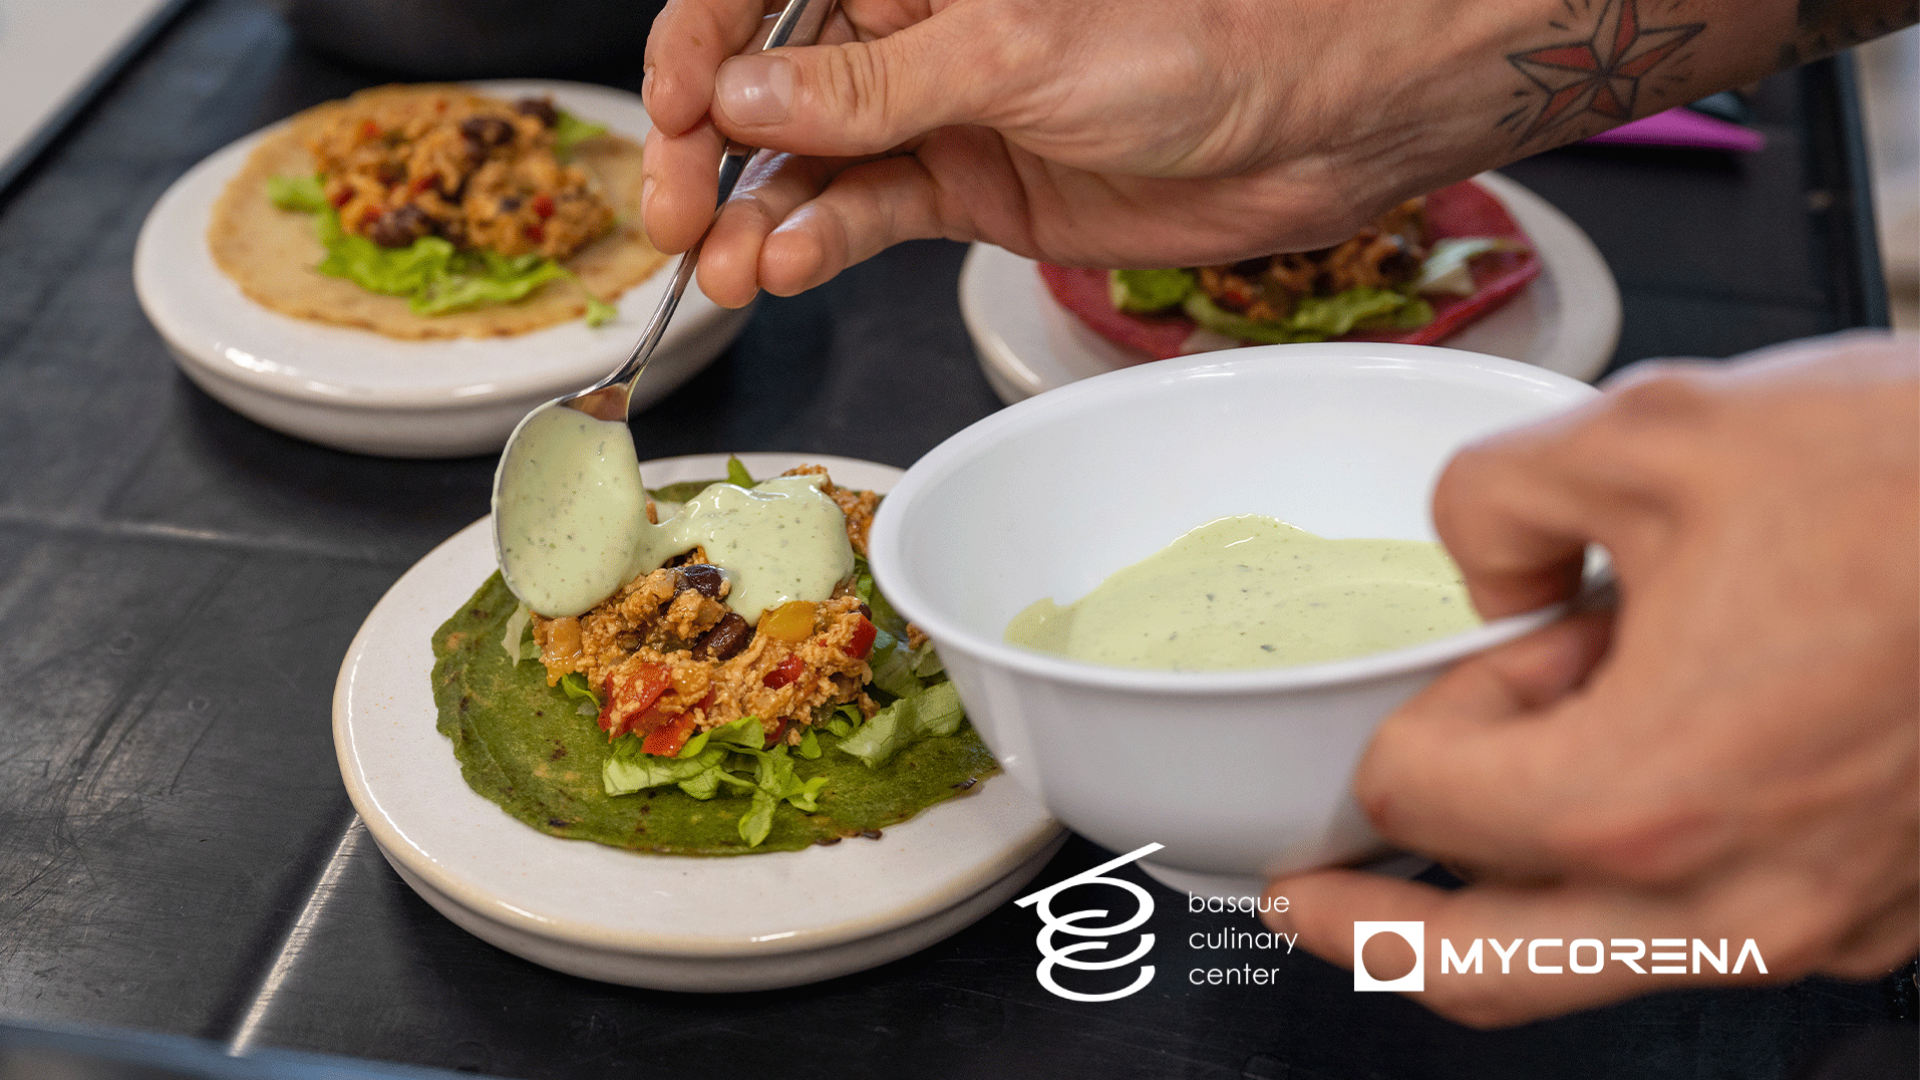 Mycorena launches its culinary challenge ‘Promycing Future’ - for student teams at the Gastronomic Science program of Basque Culinary Center